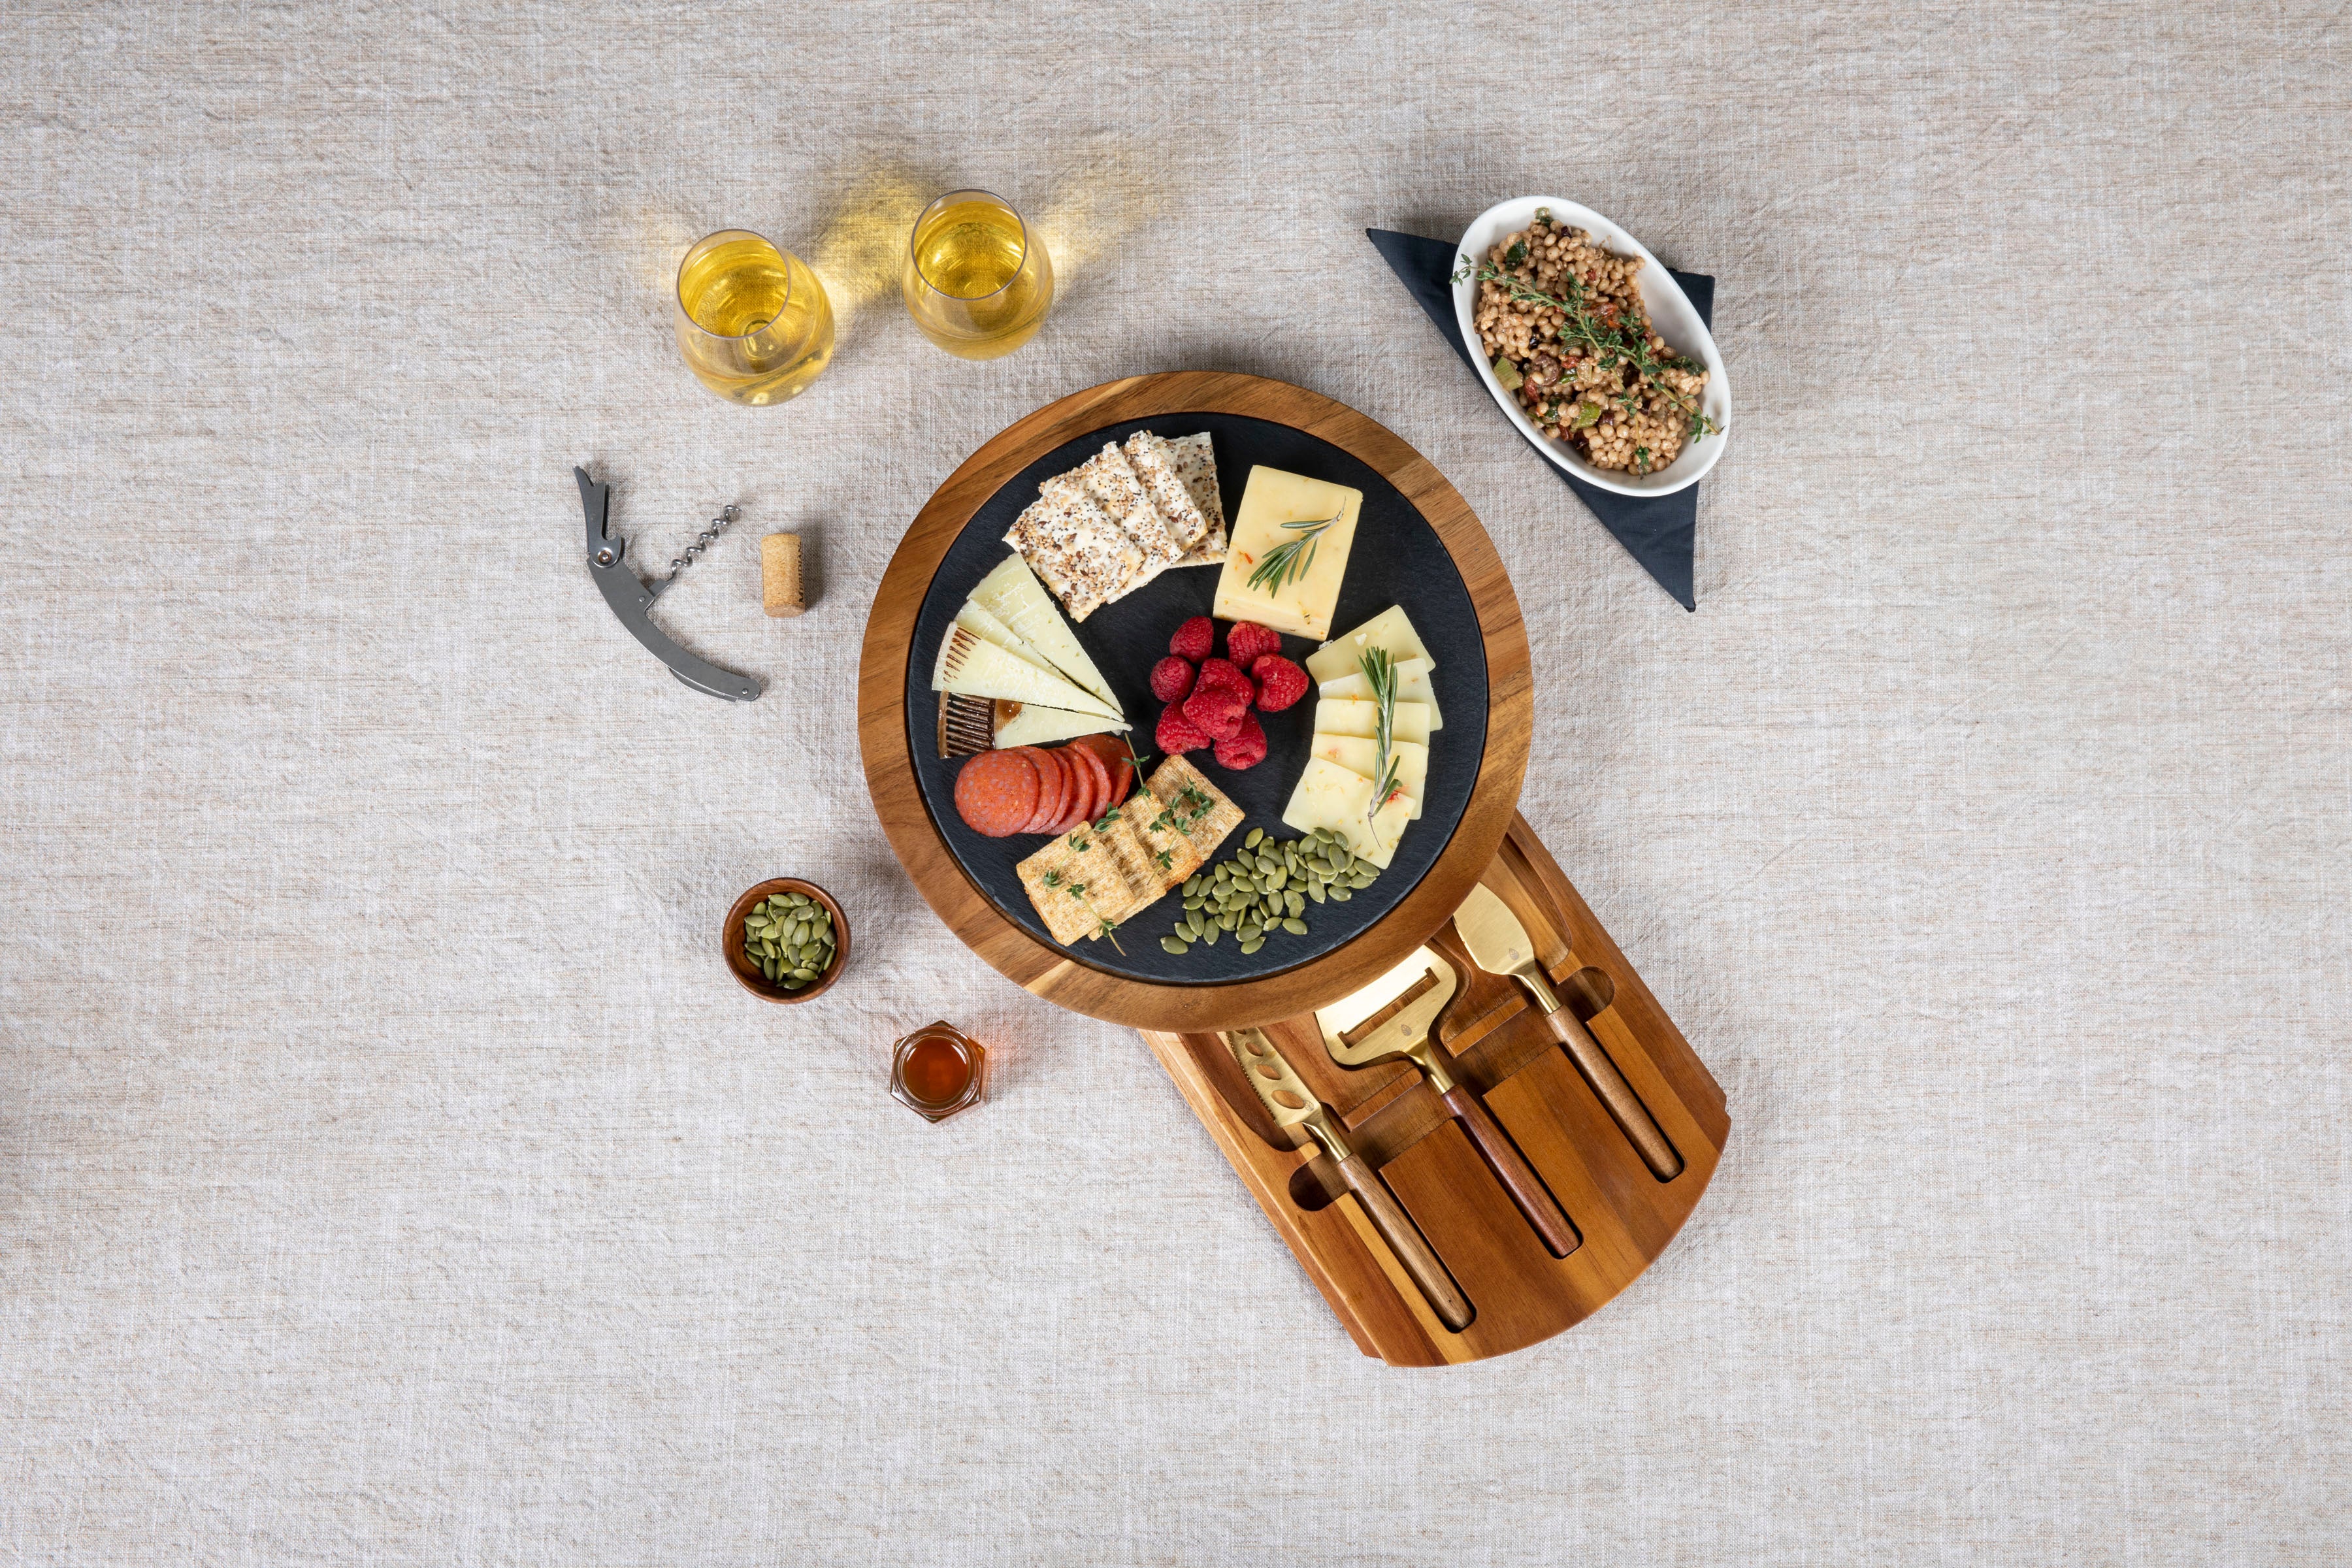 Carolina Panthers - Insignia Acacia and Slate Serving Board with Cheese Tools